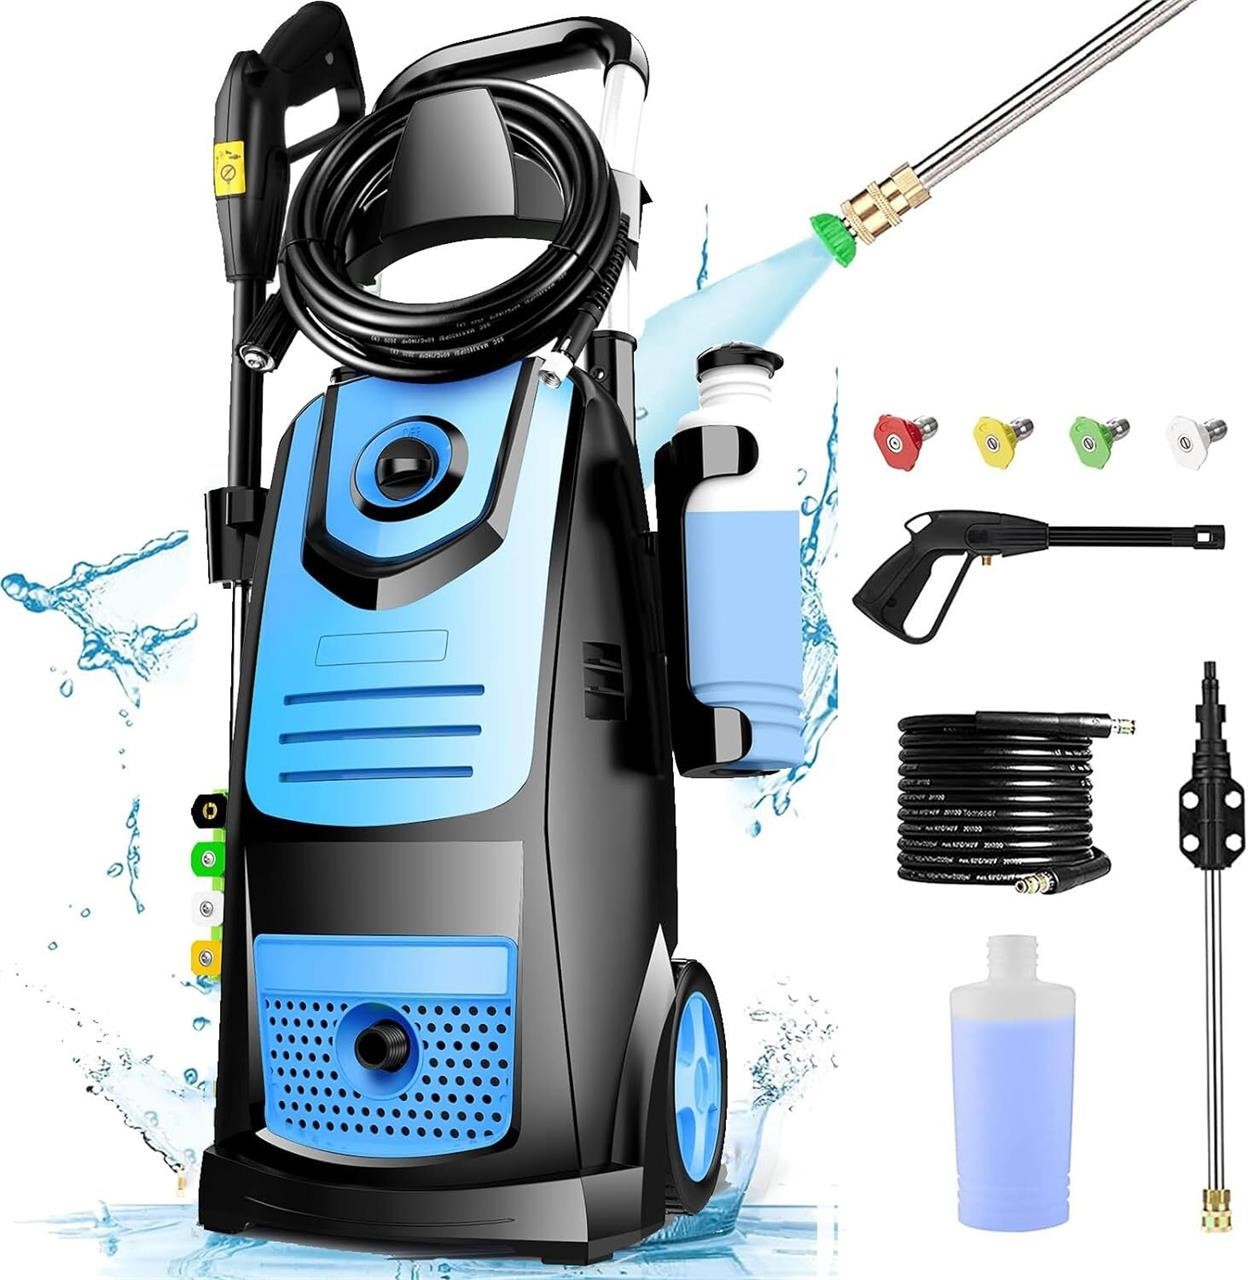 mrliance SY 3800 Electric Pressure Washer  3.9GPM